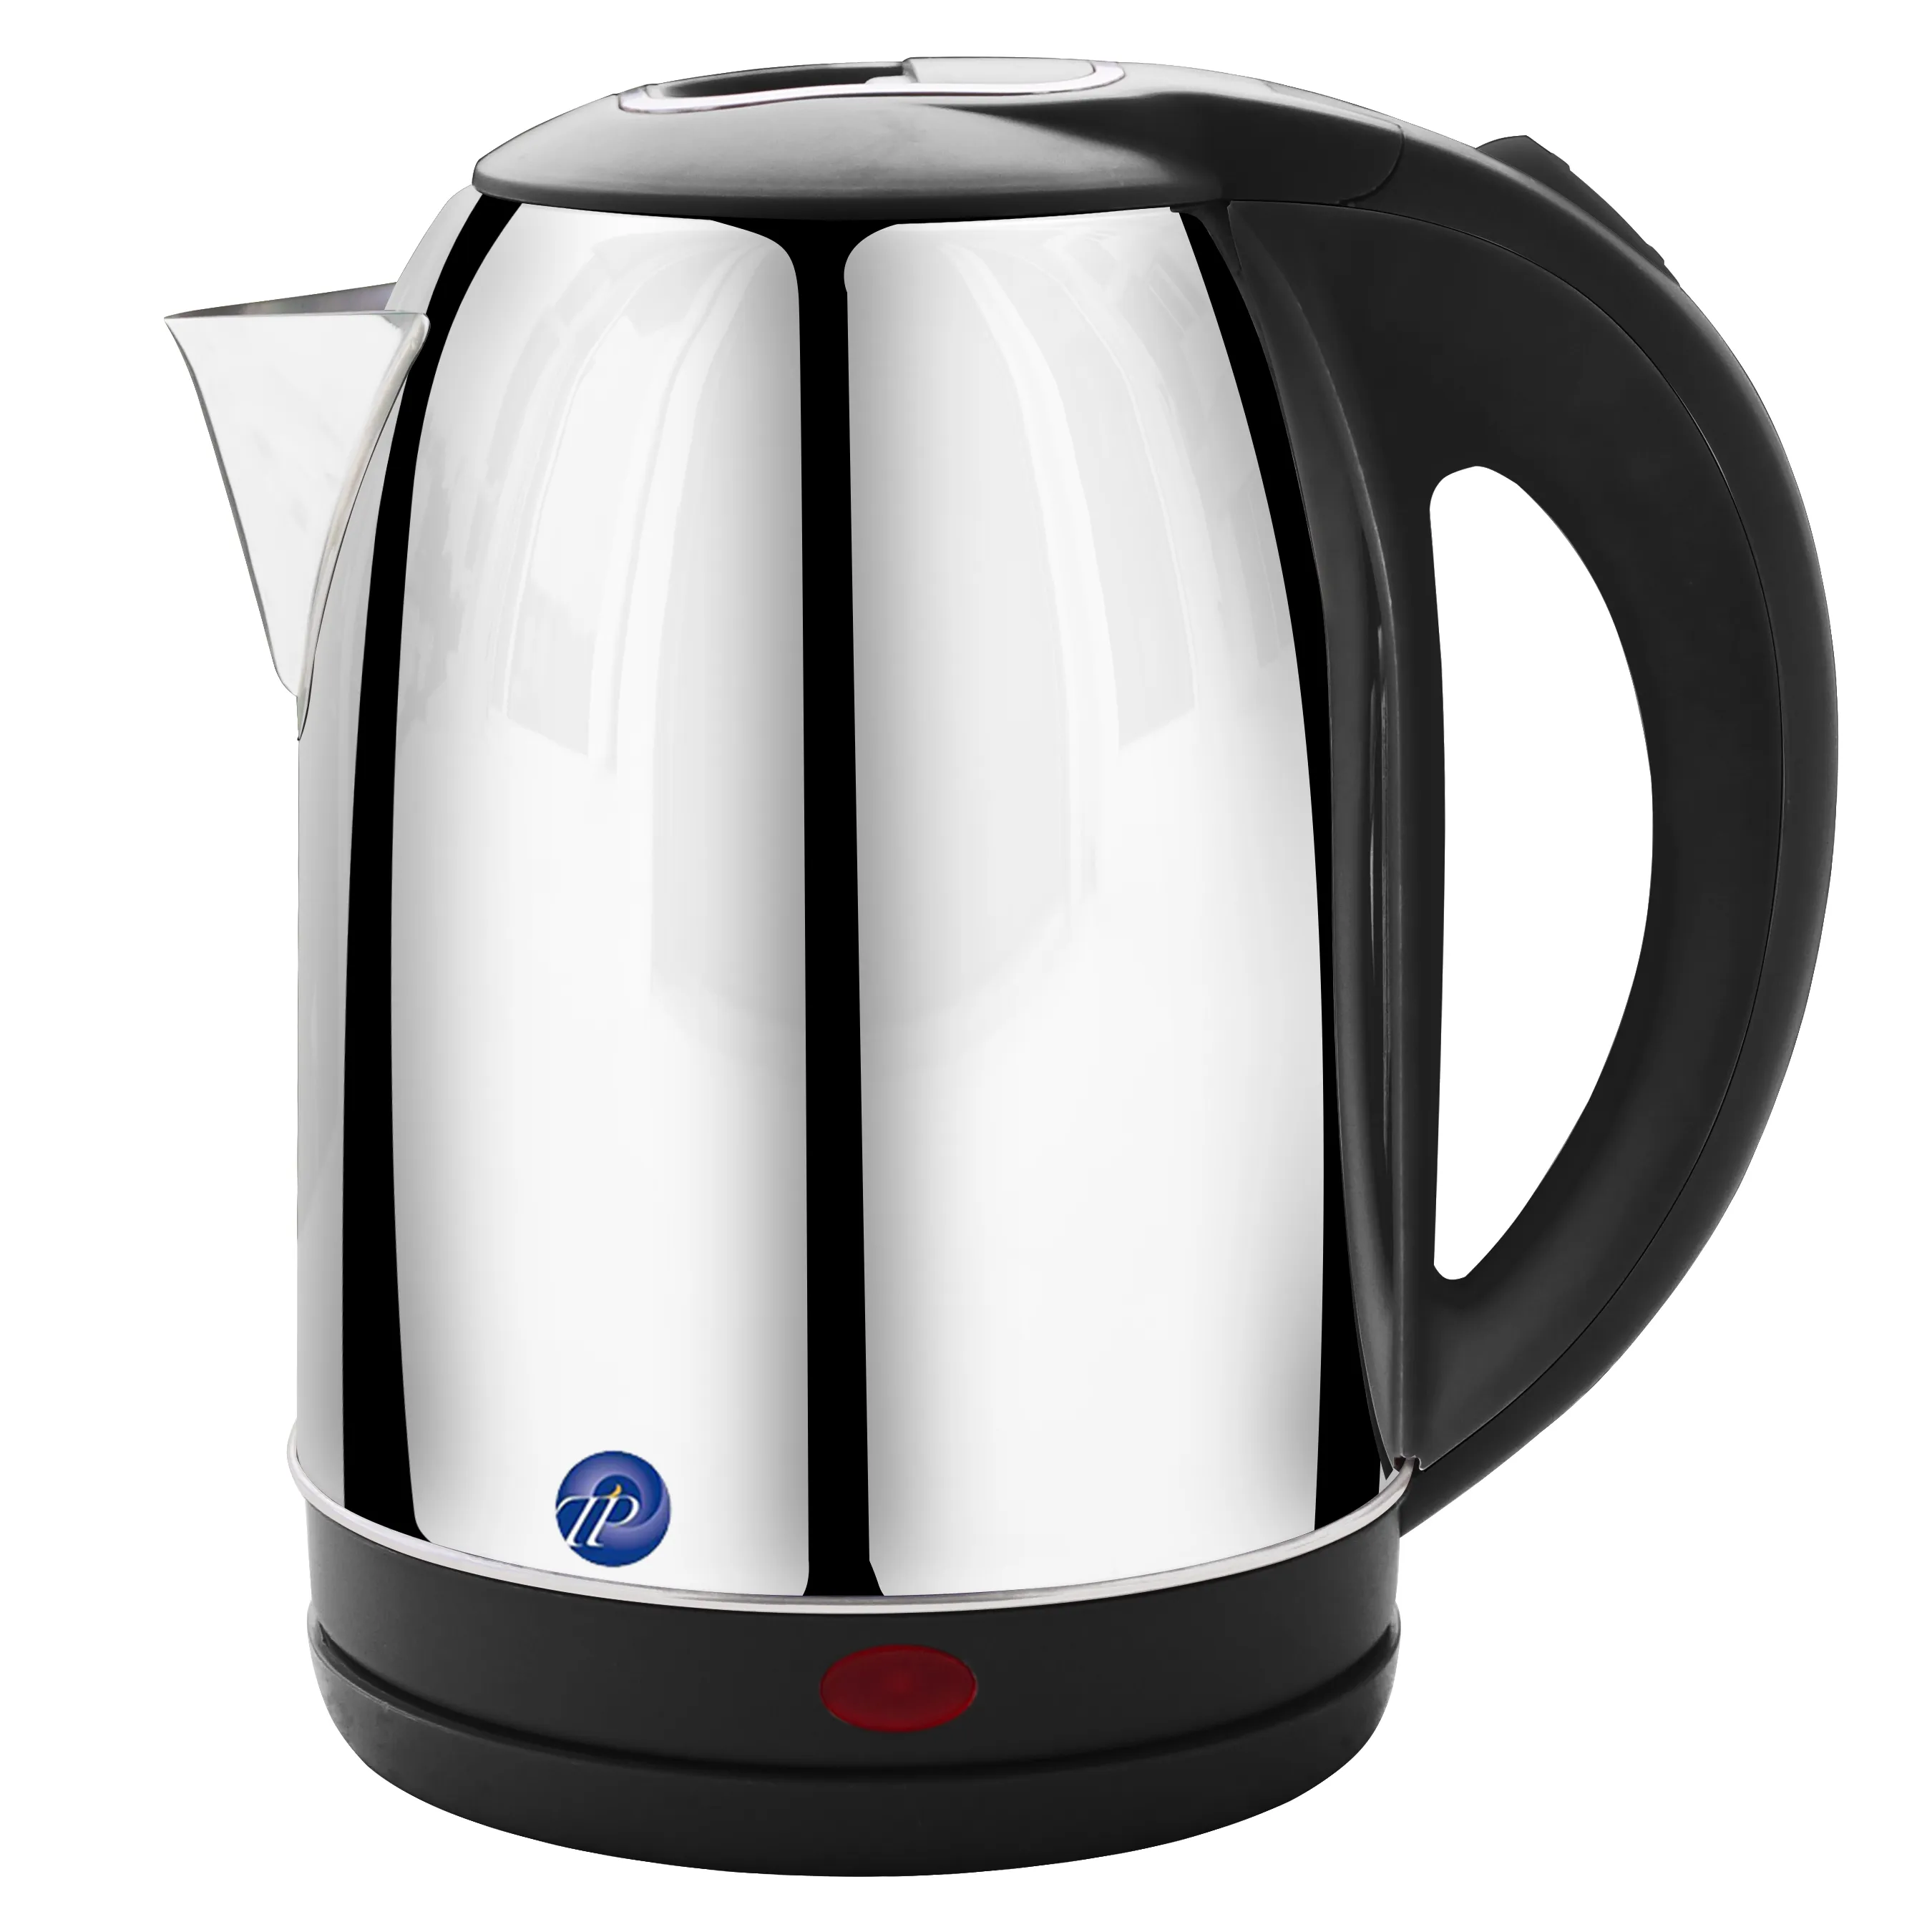 2.5 liter Stainless steel electric tea kettle